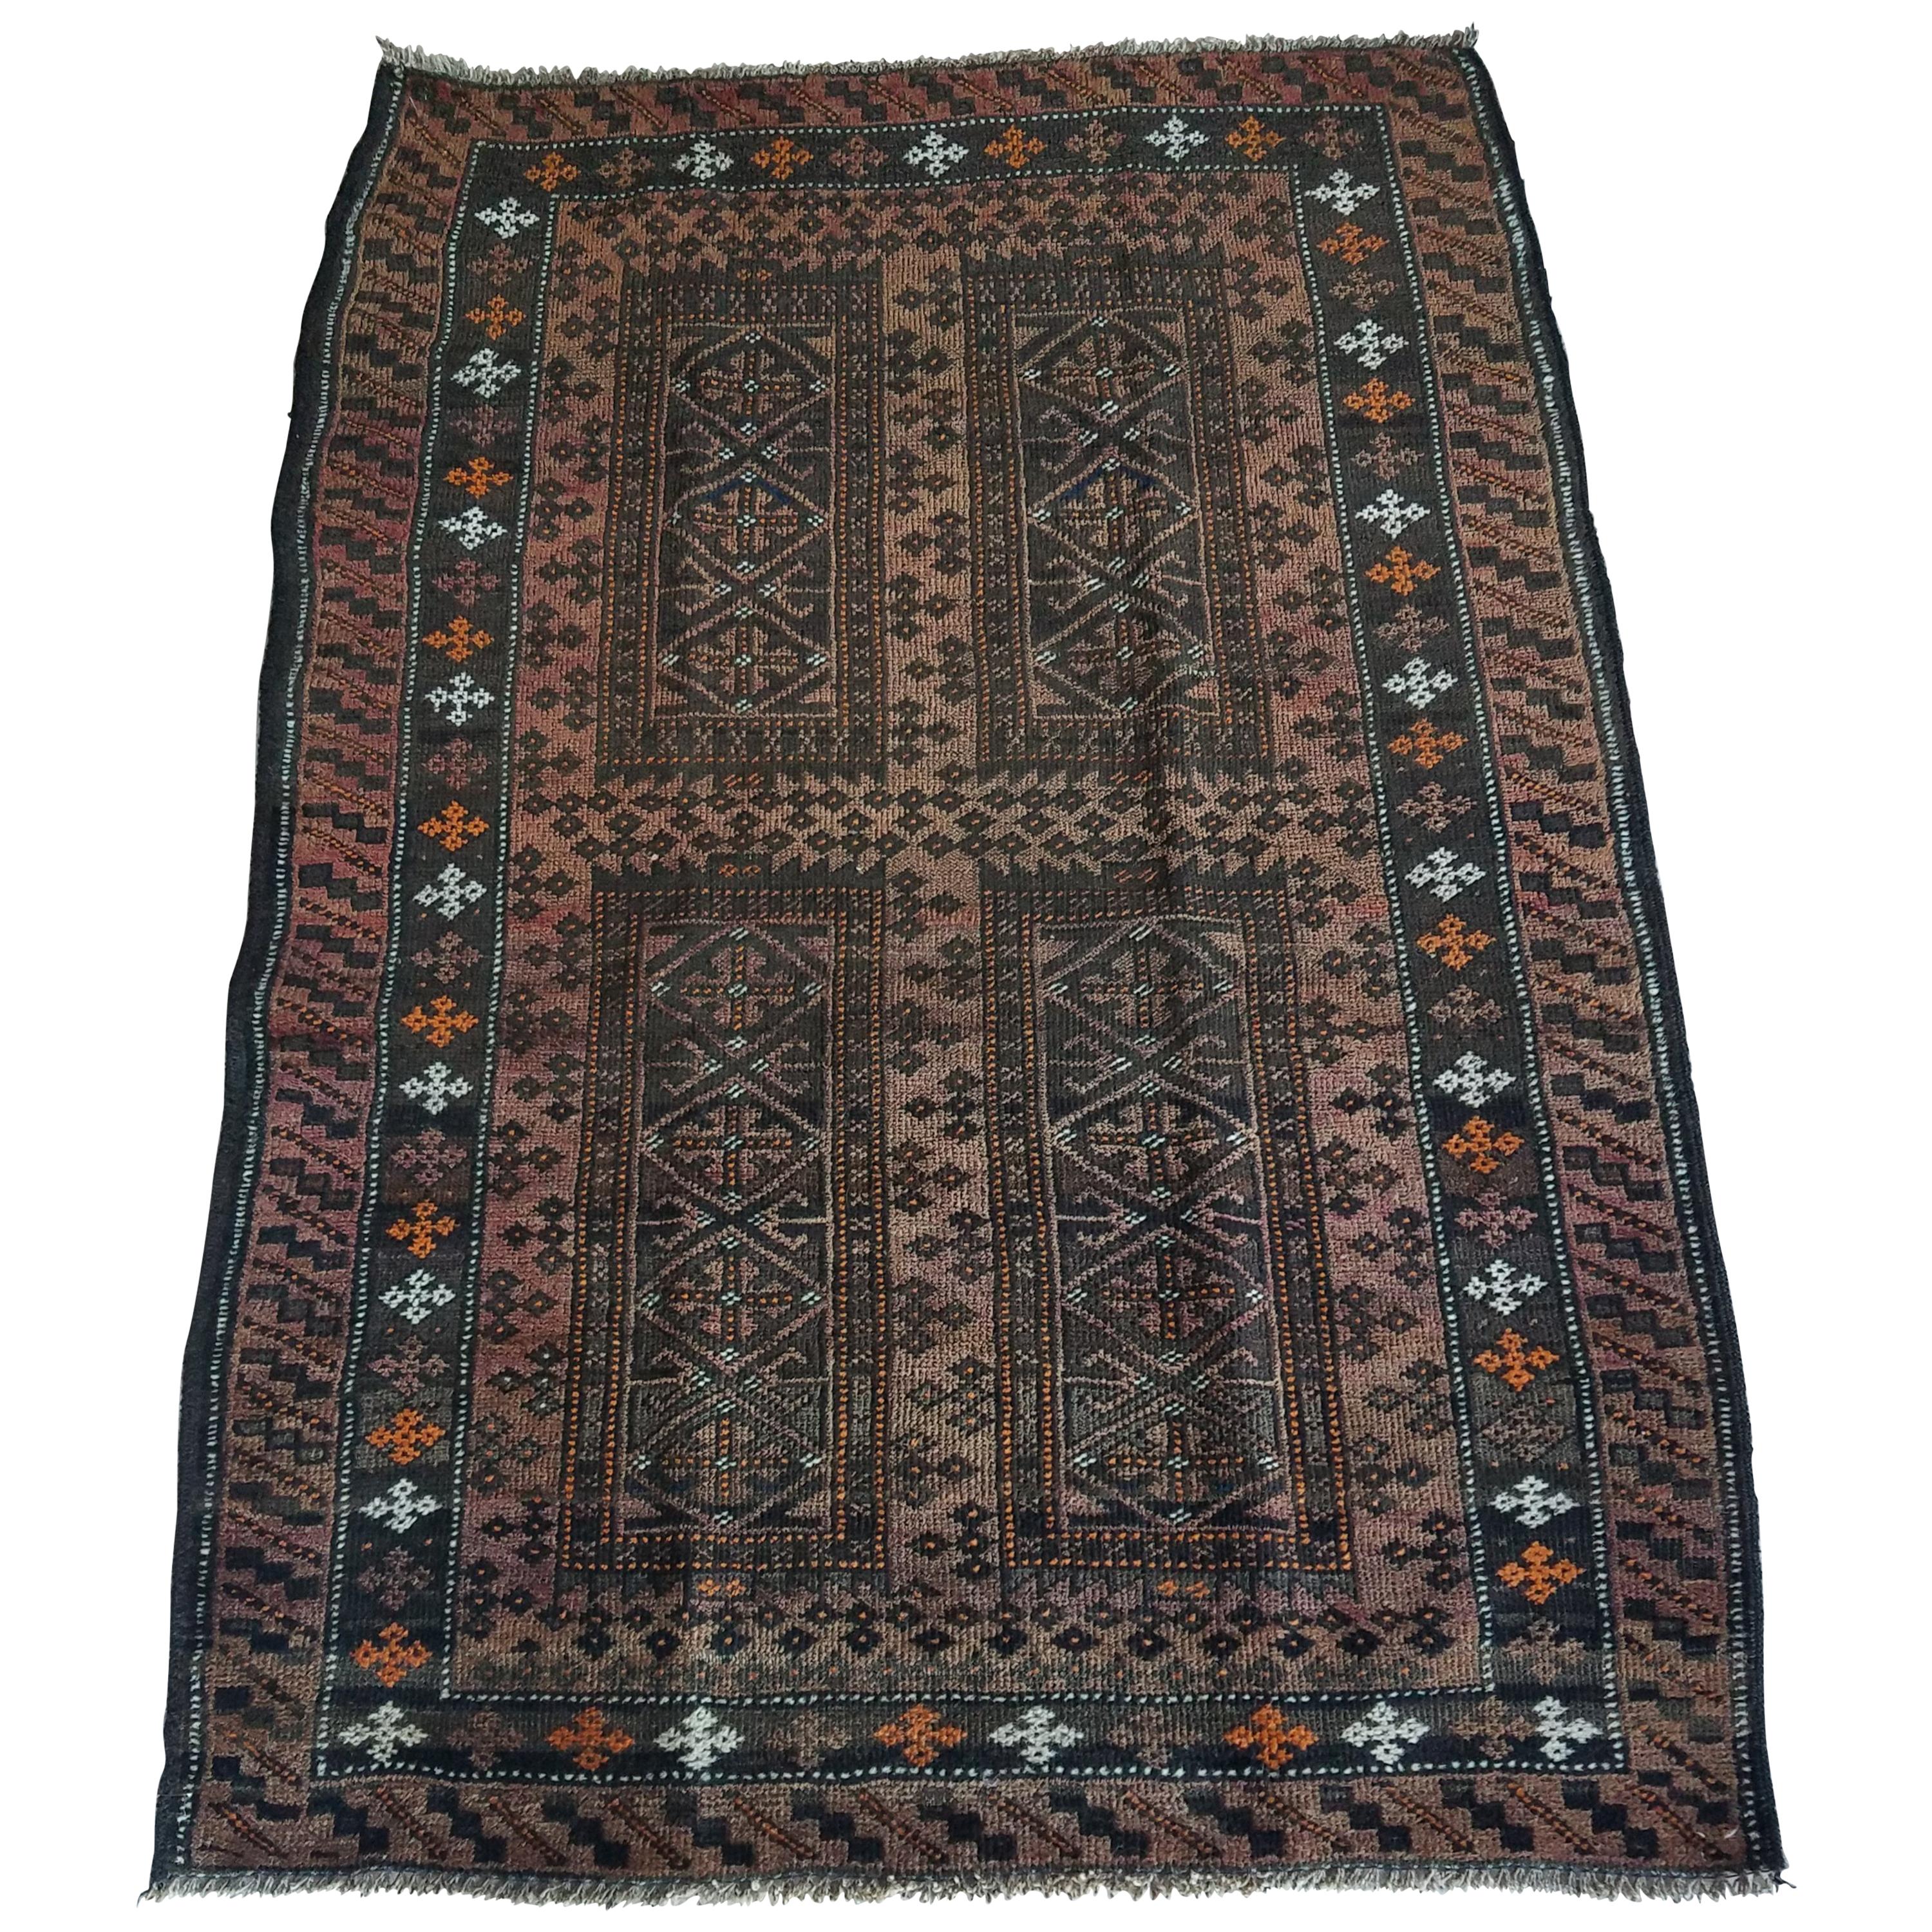 Incredible Piece of Art, Oriental Tribal Area Rug, Sar 5 For Sale